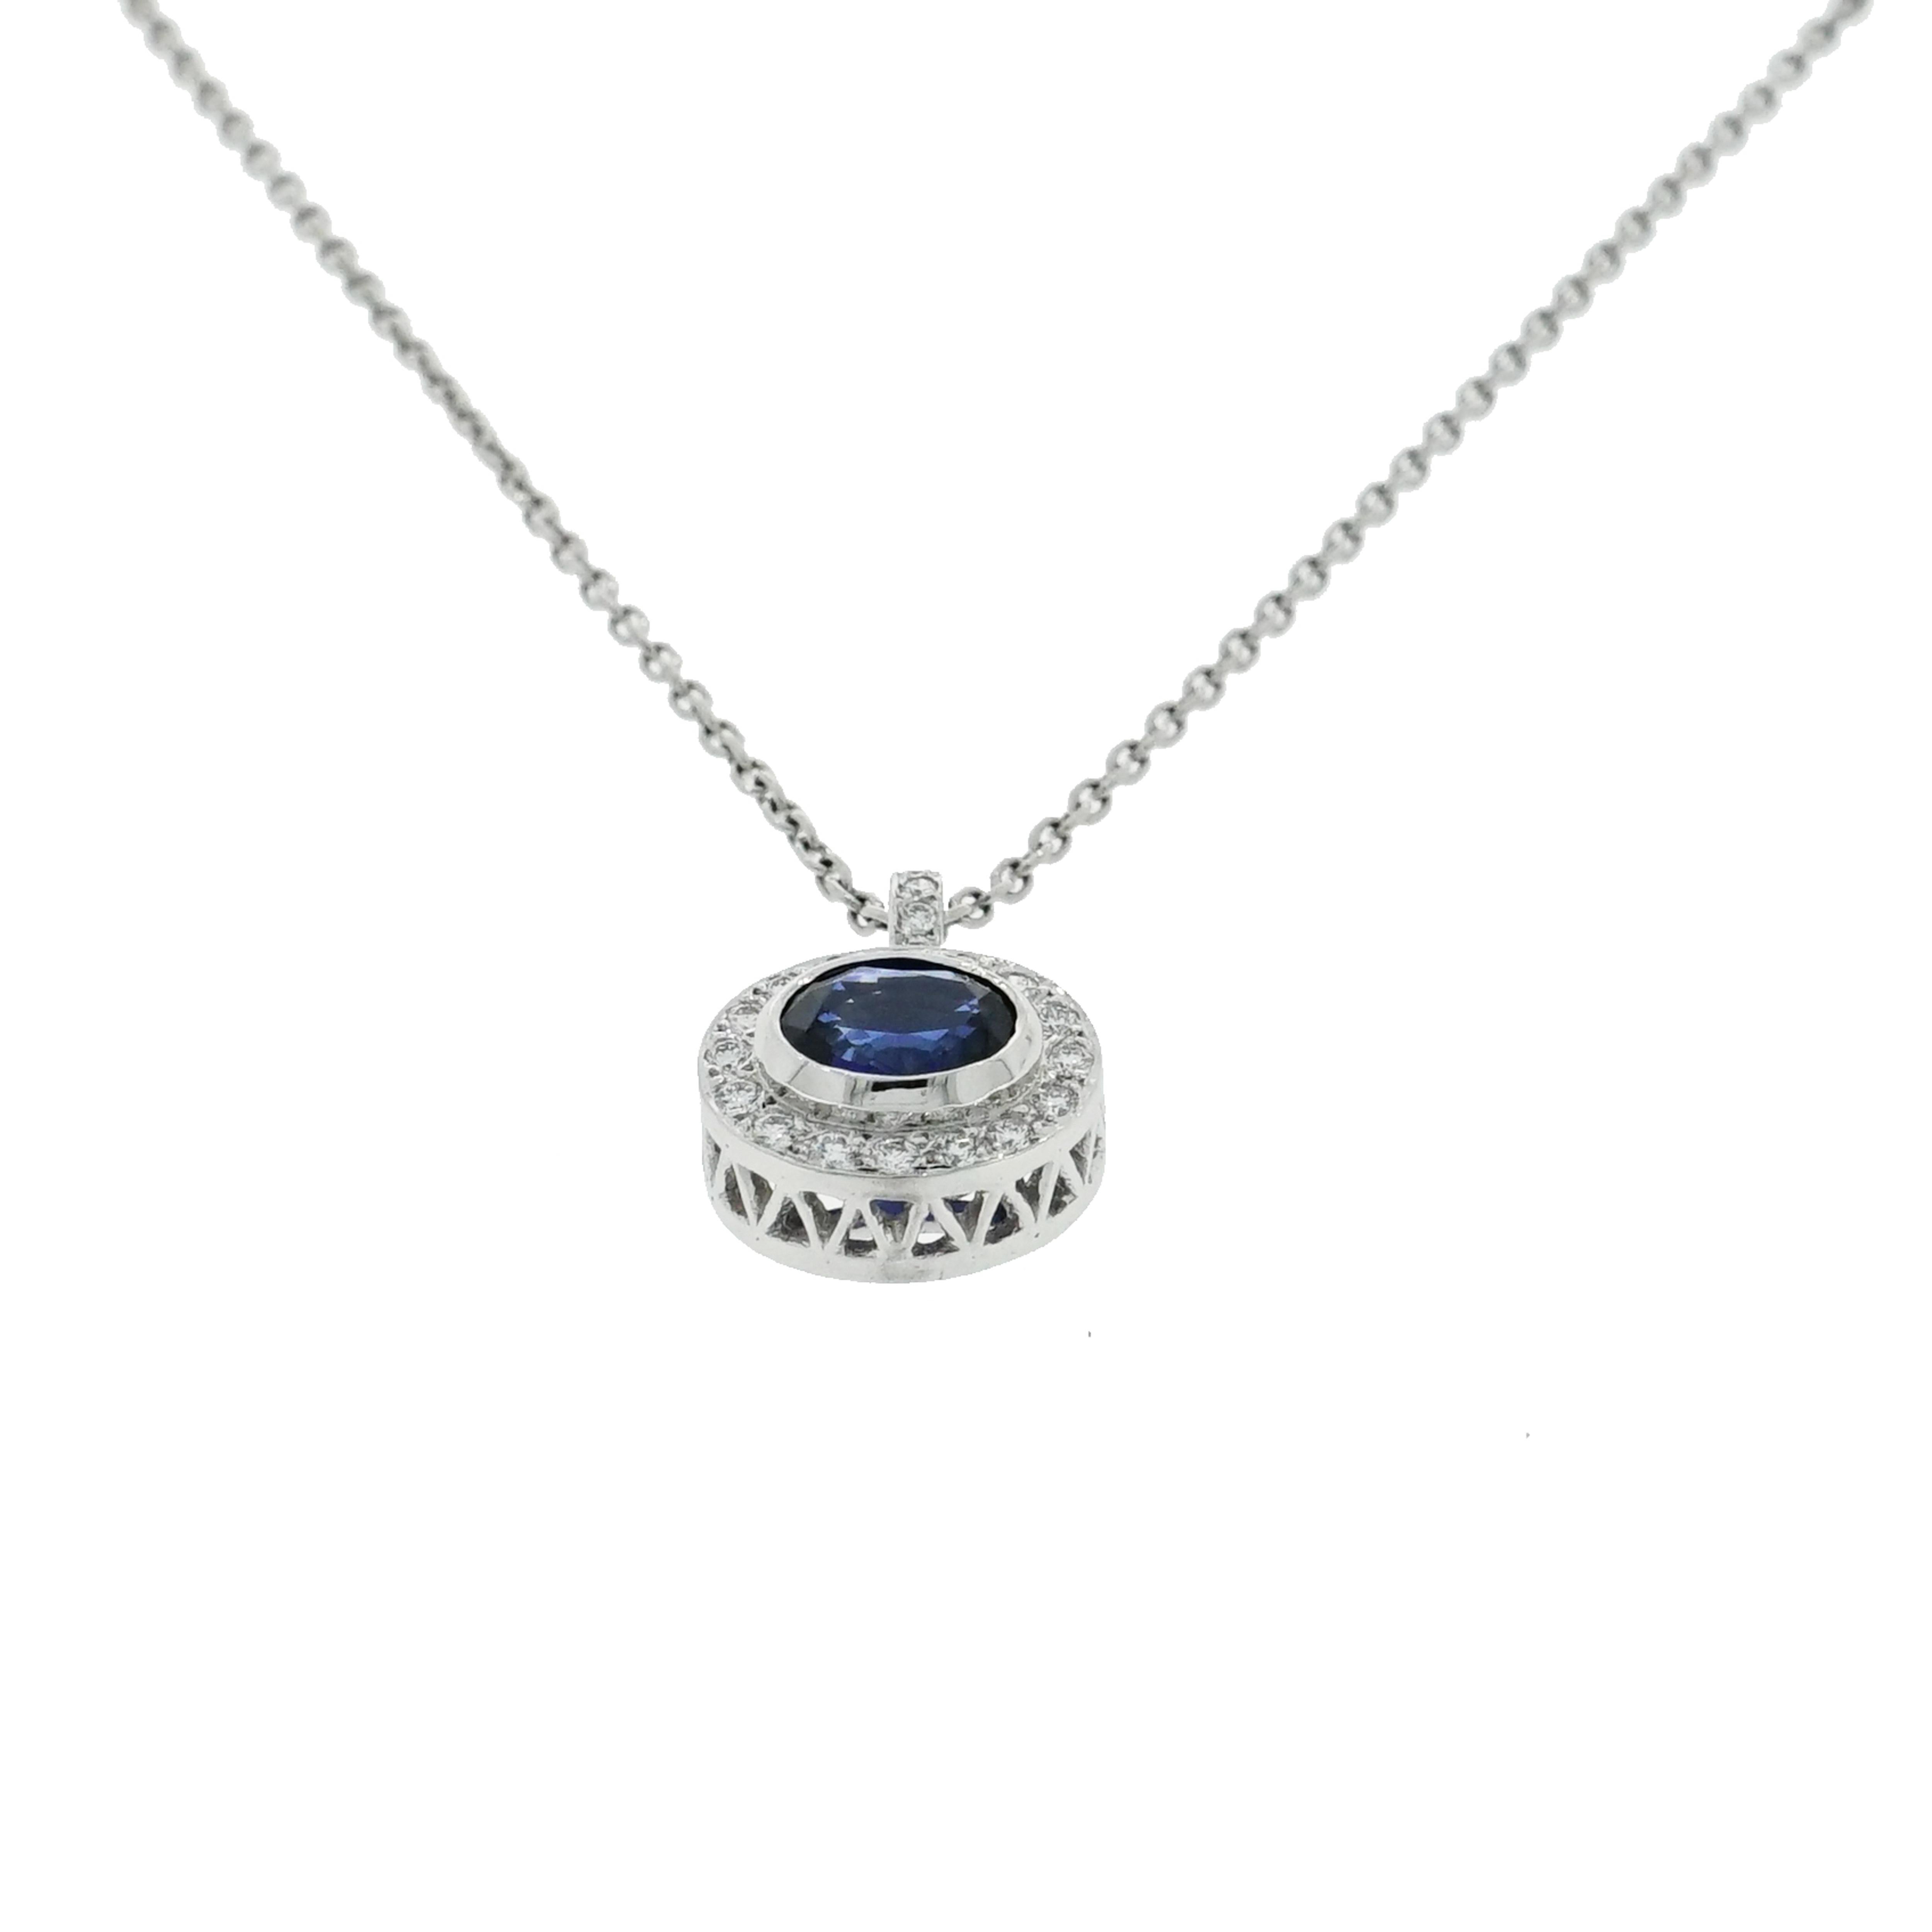 This beautiful Sapphire and Diamond pendant combined a 2.50 carat oval shaped Sapphire set east-west surrounded with approximately 0.50 carat of round brilliant cut diamonds in a gorgeous filigree style halo setting. 
The top of the pendant has a